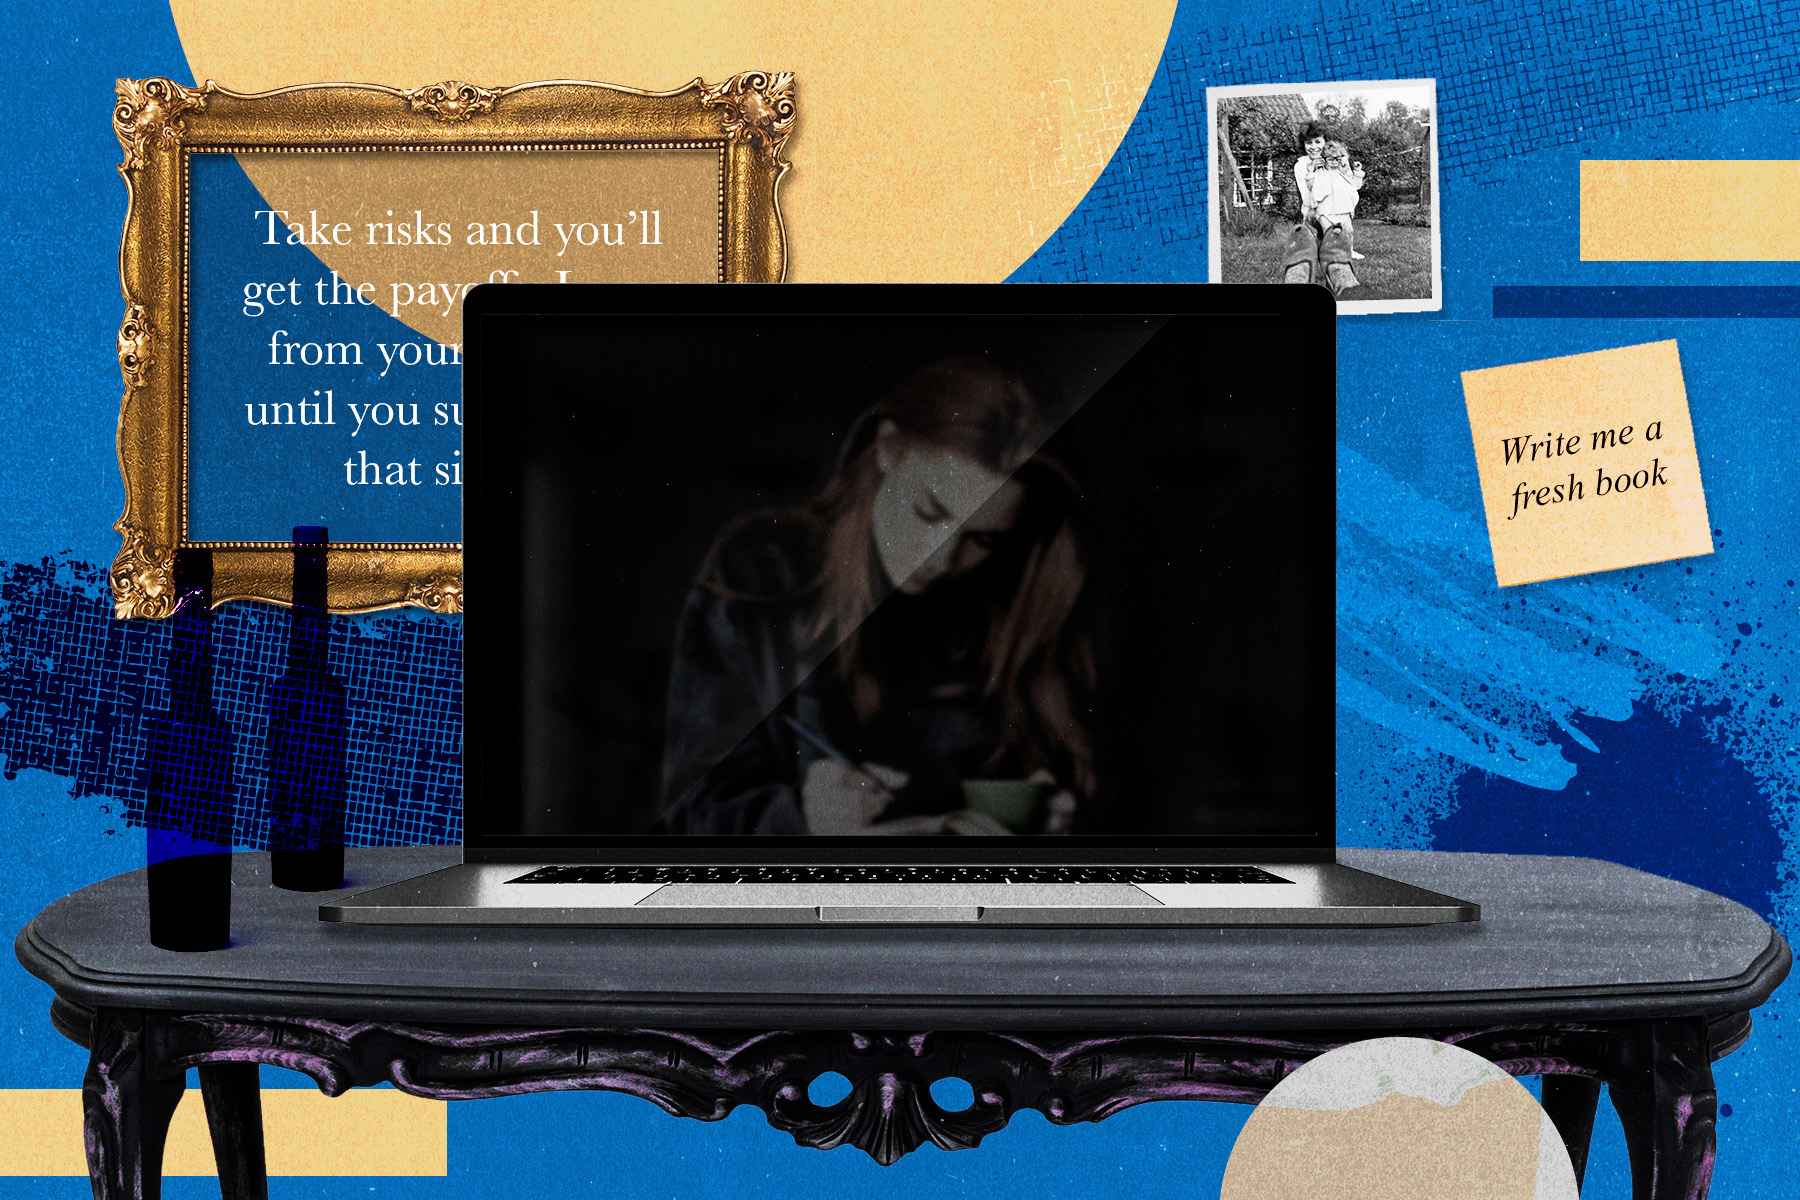 An illustration of a laptop on a desk against a blue background, with images and quotes on the wall